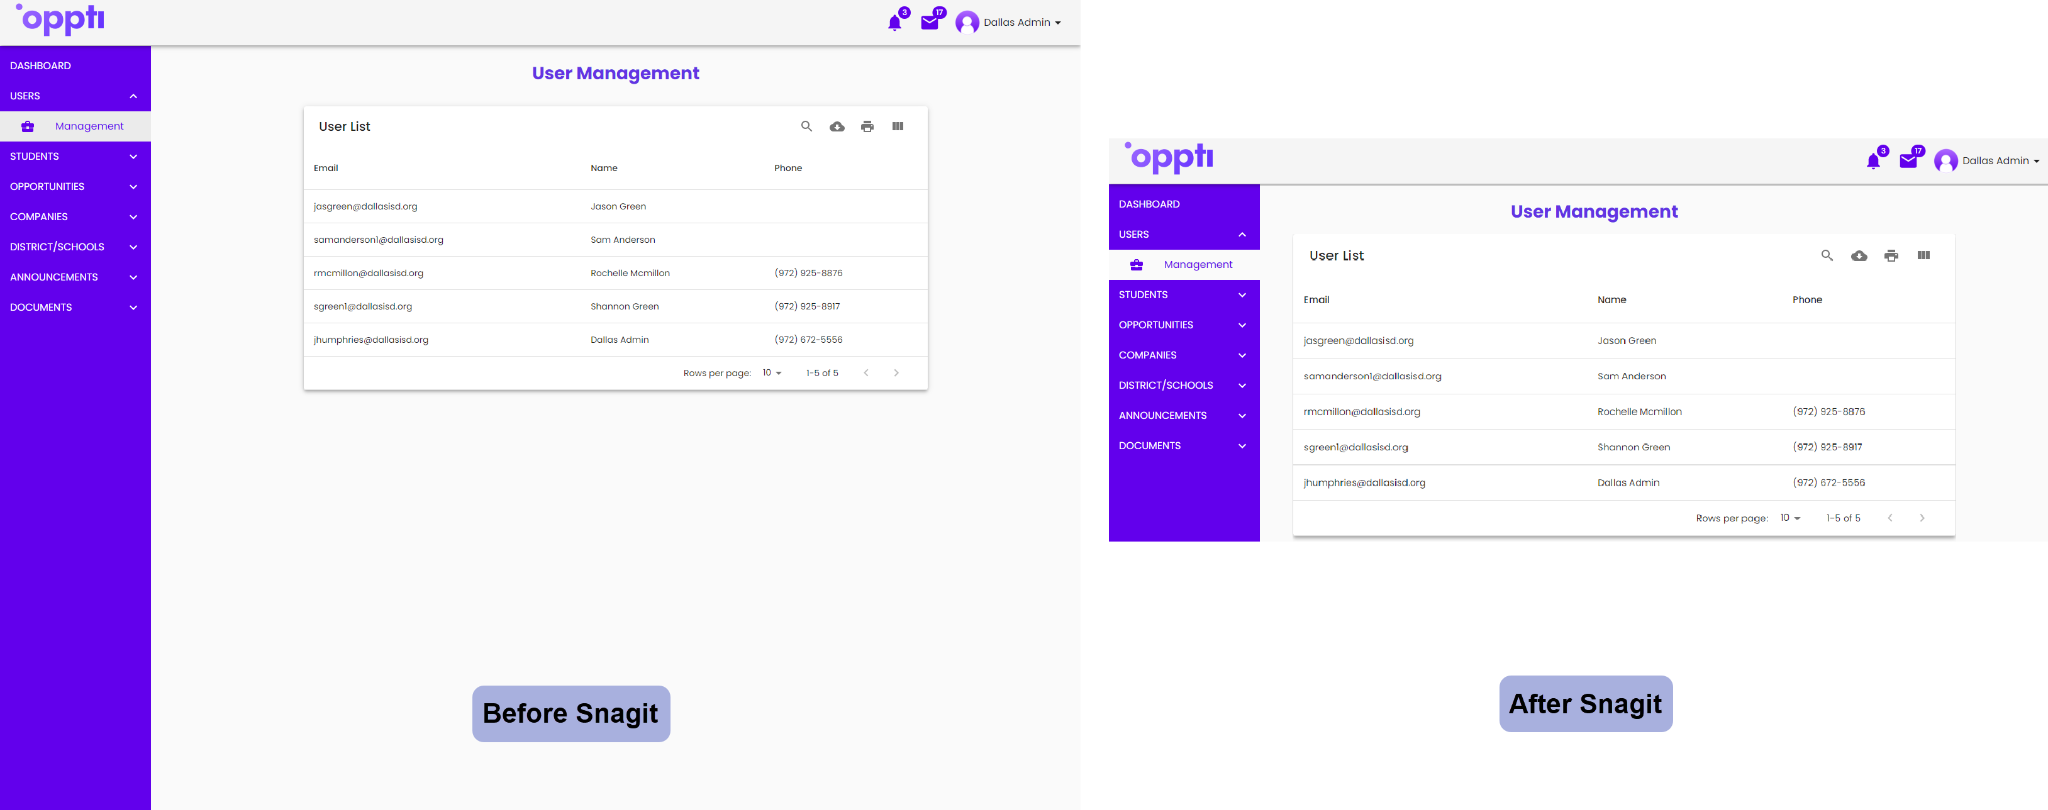 On the left: User Management page before using Snagit software, displaying the original user interface. On the right: User Management page after using Snagit software to remove extra whitespace and improve readability. 